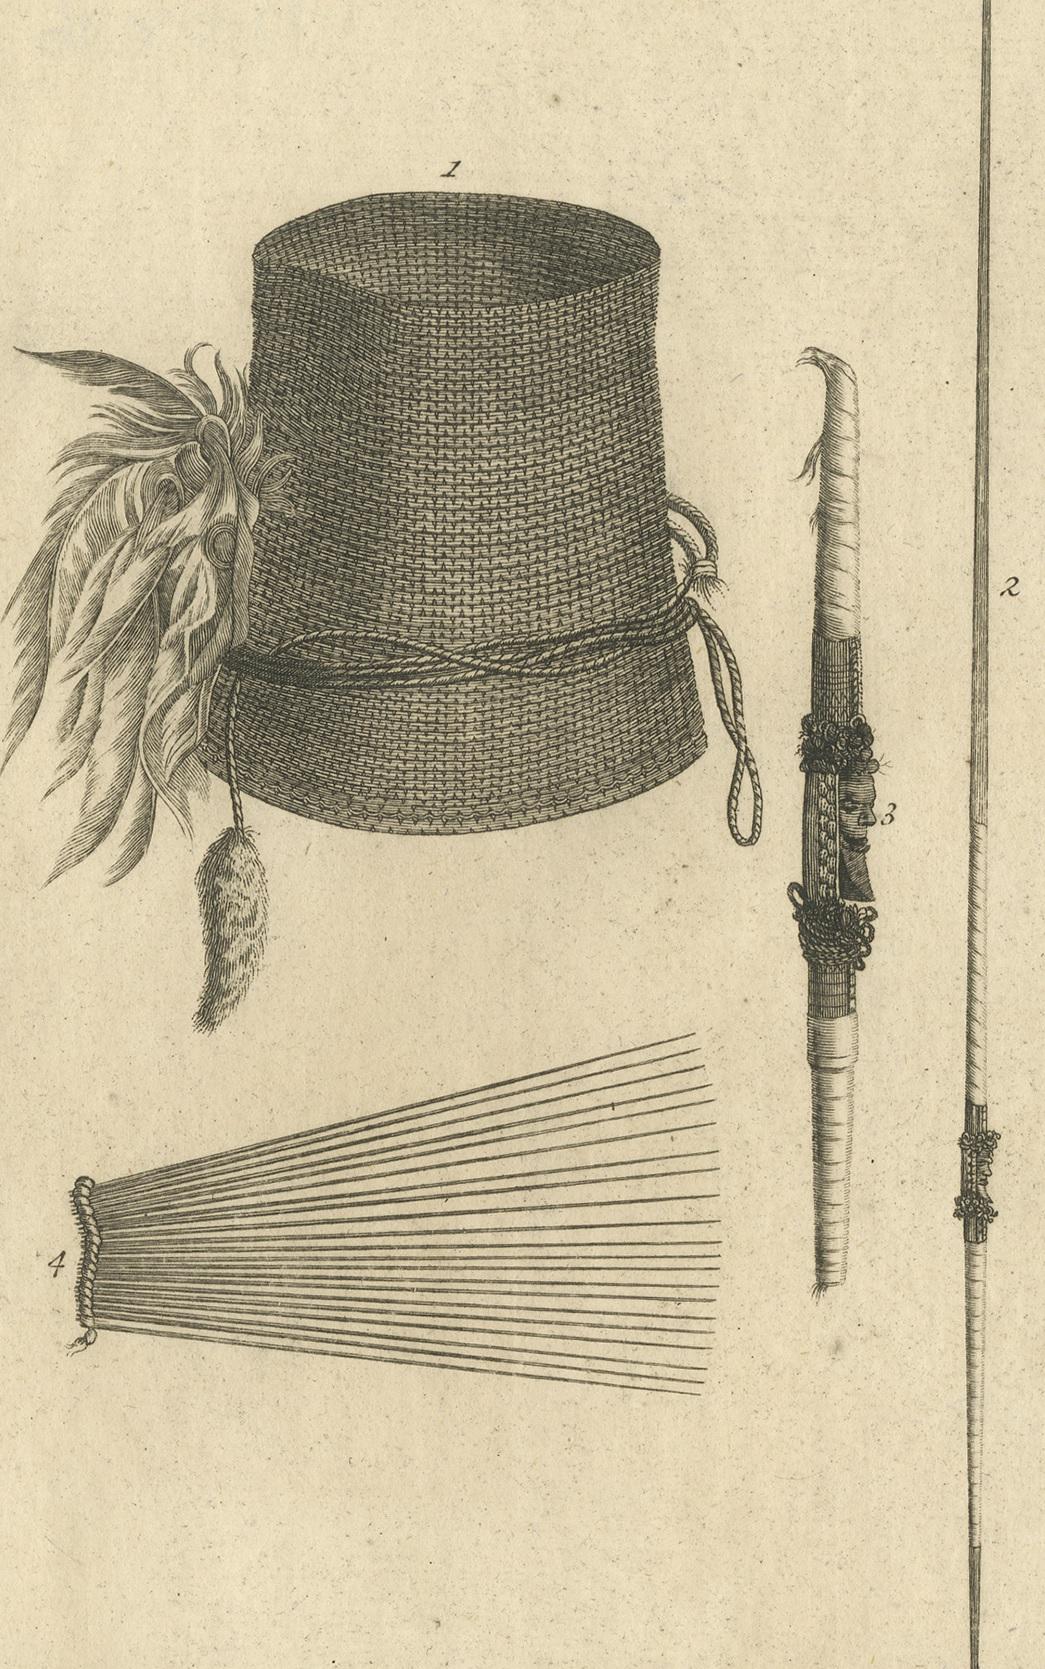 Engraved Antique Print Depicting Weapon Decorations Produced by Natives by Cook, 1803 For Sale